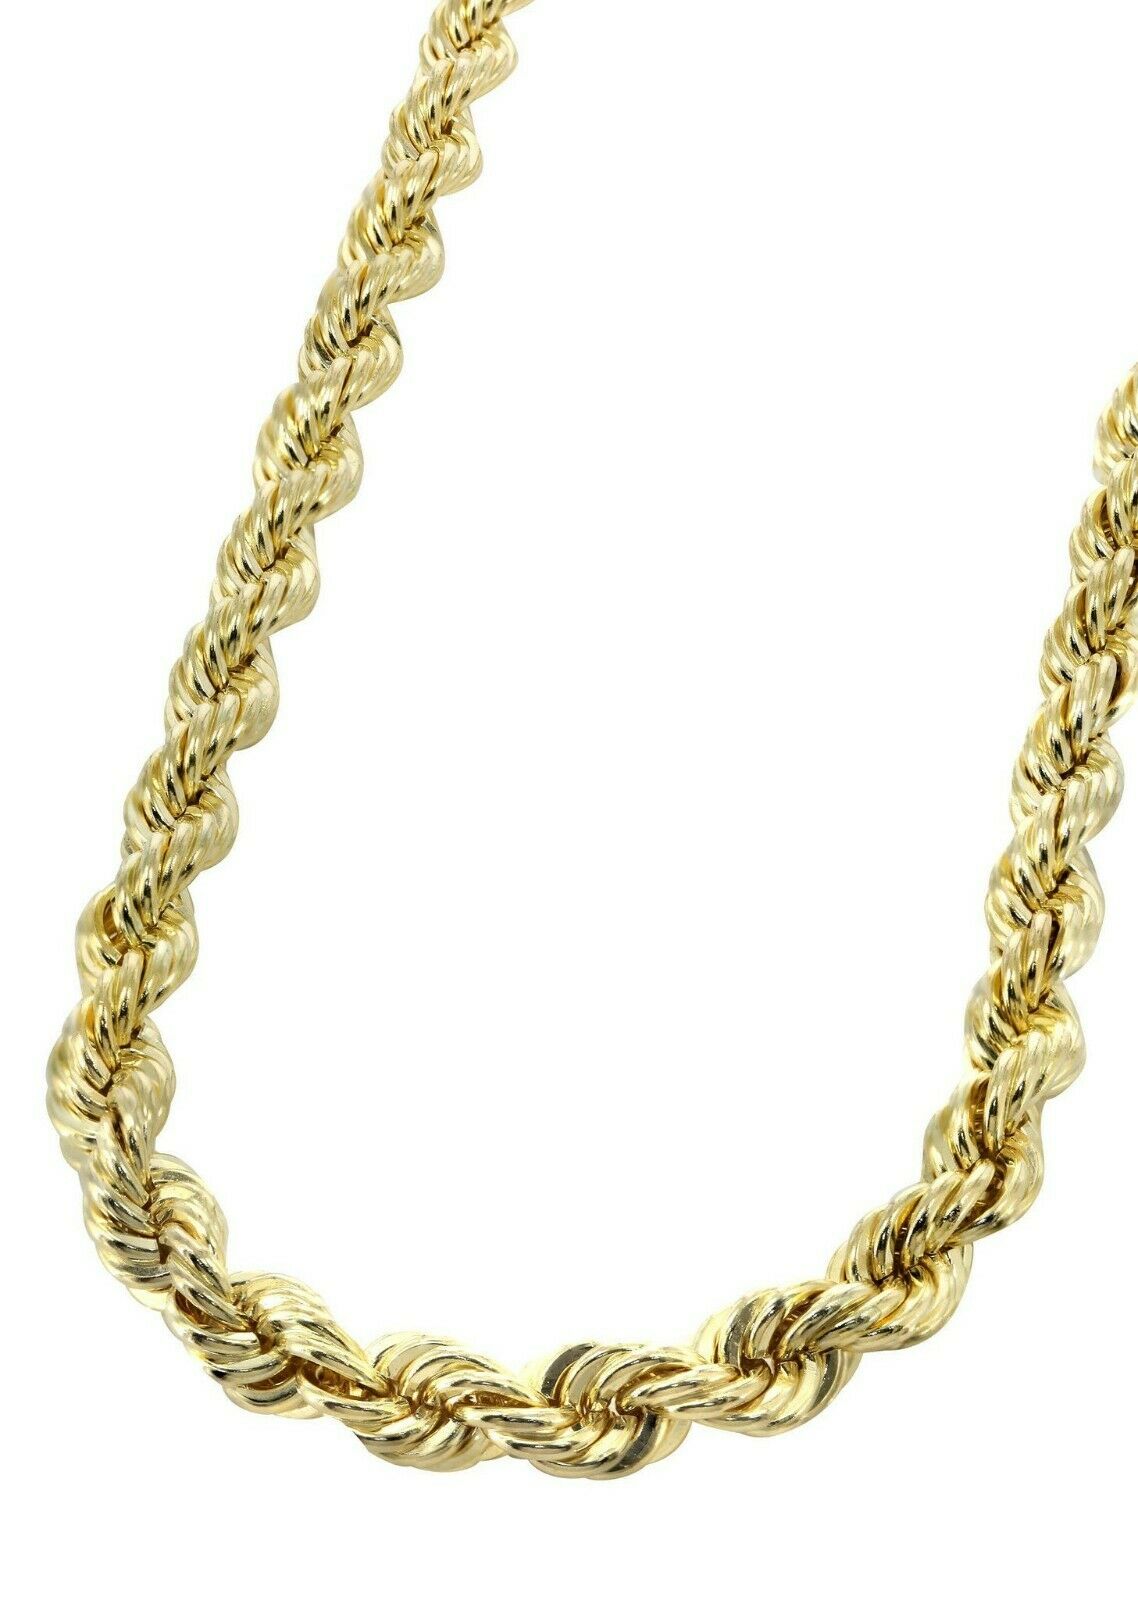 10K Gold Rope Chain Necklace 20 Inch 8mm Yellow Gold Lobster Lock , REAL GOLD